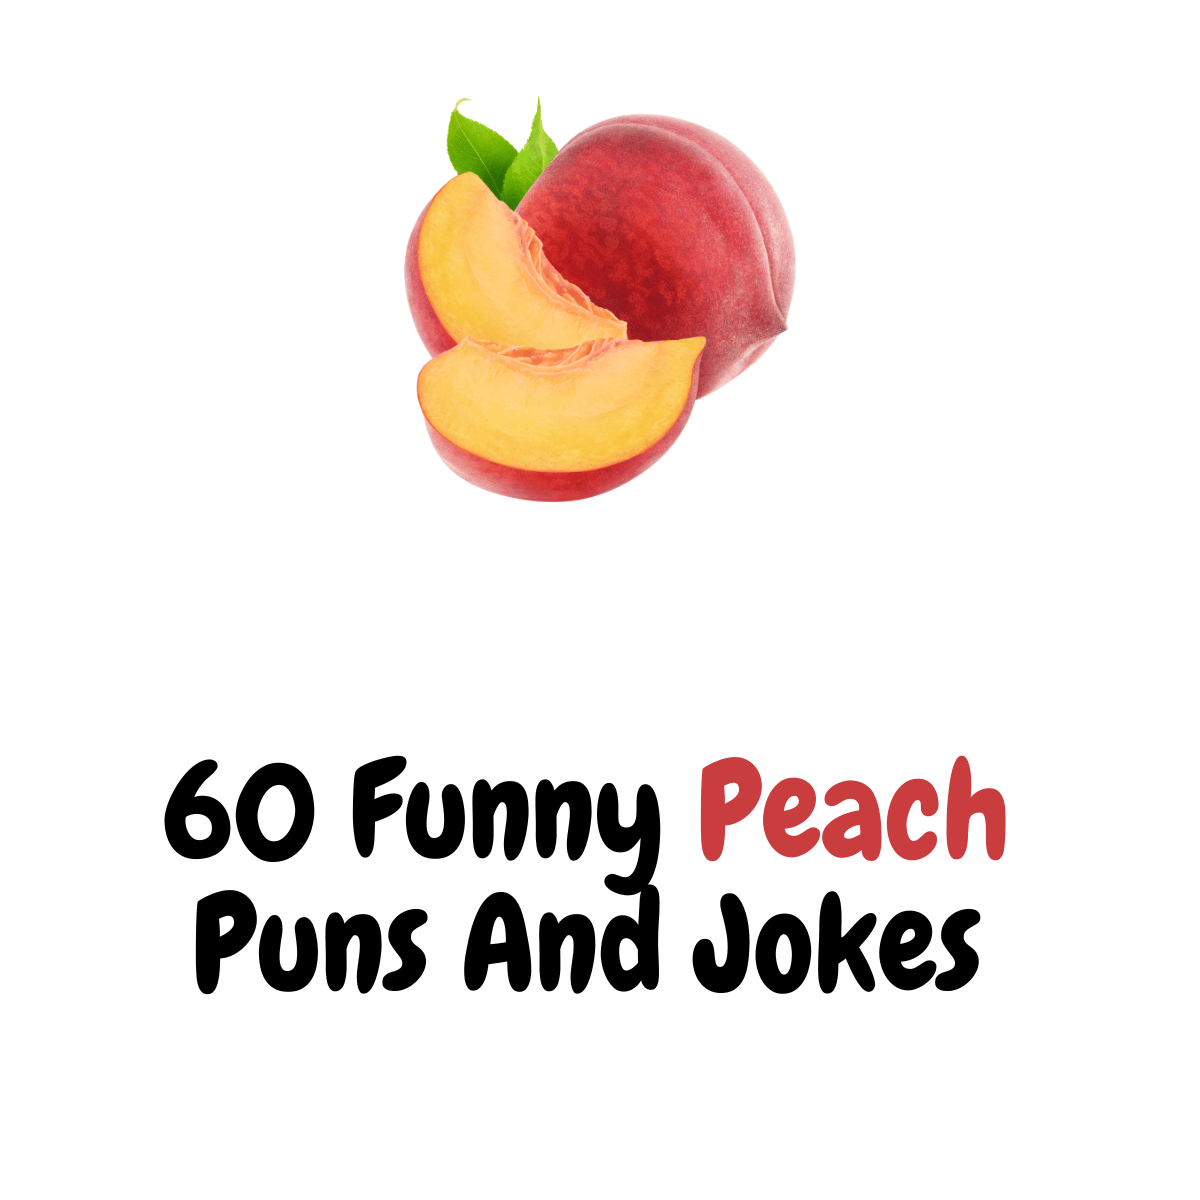 60+ Funny Peach Puns And Jokes: Fun and Fruity